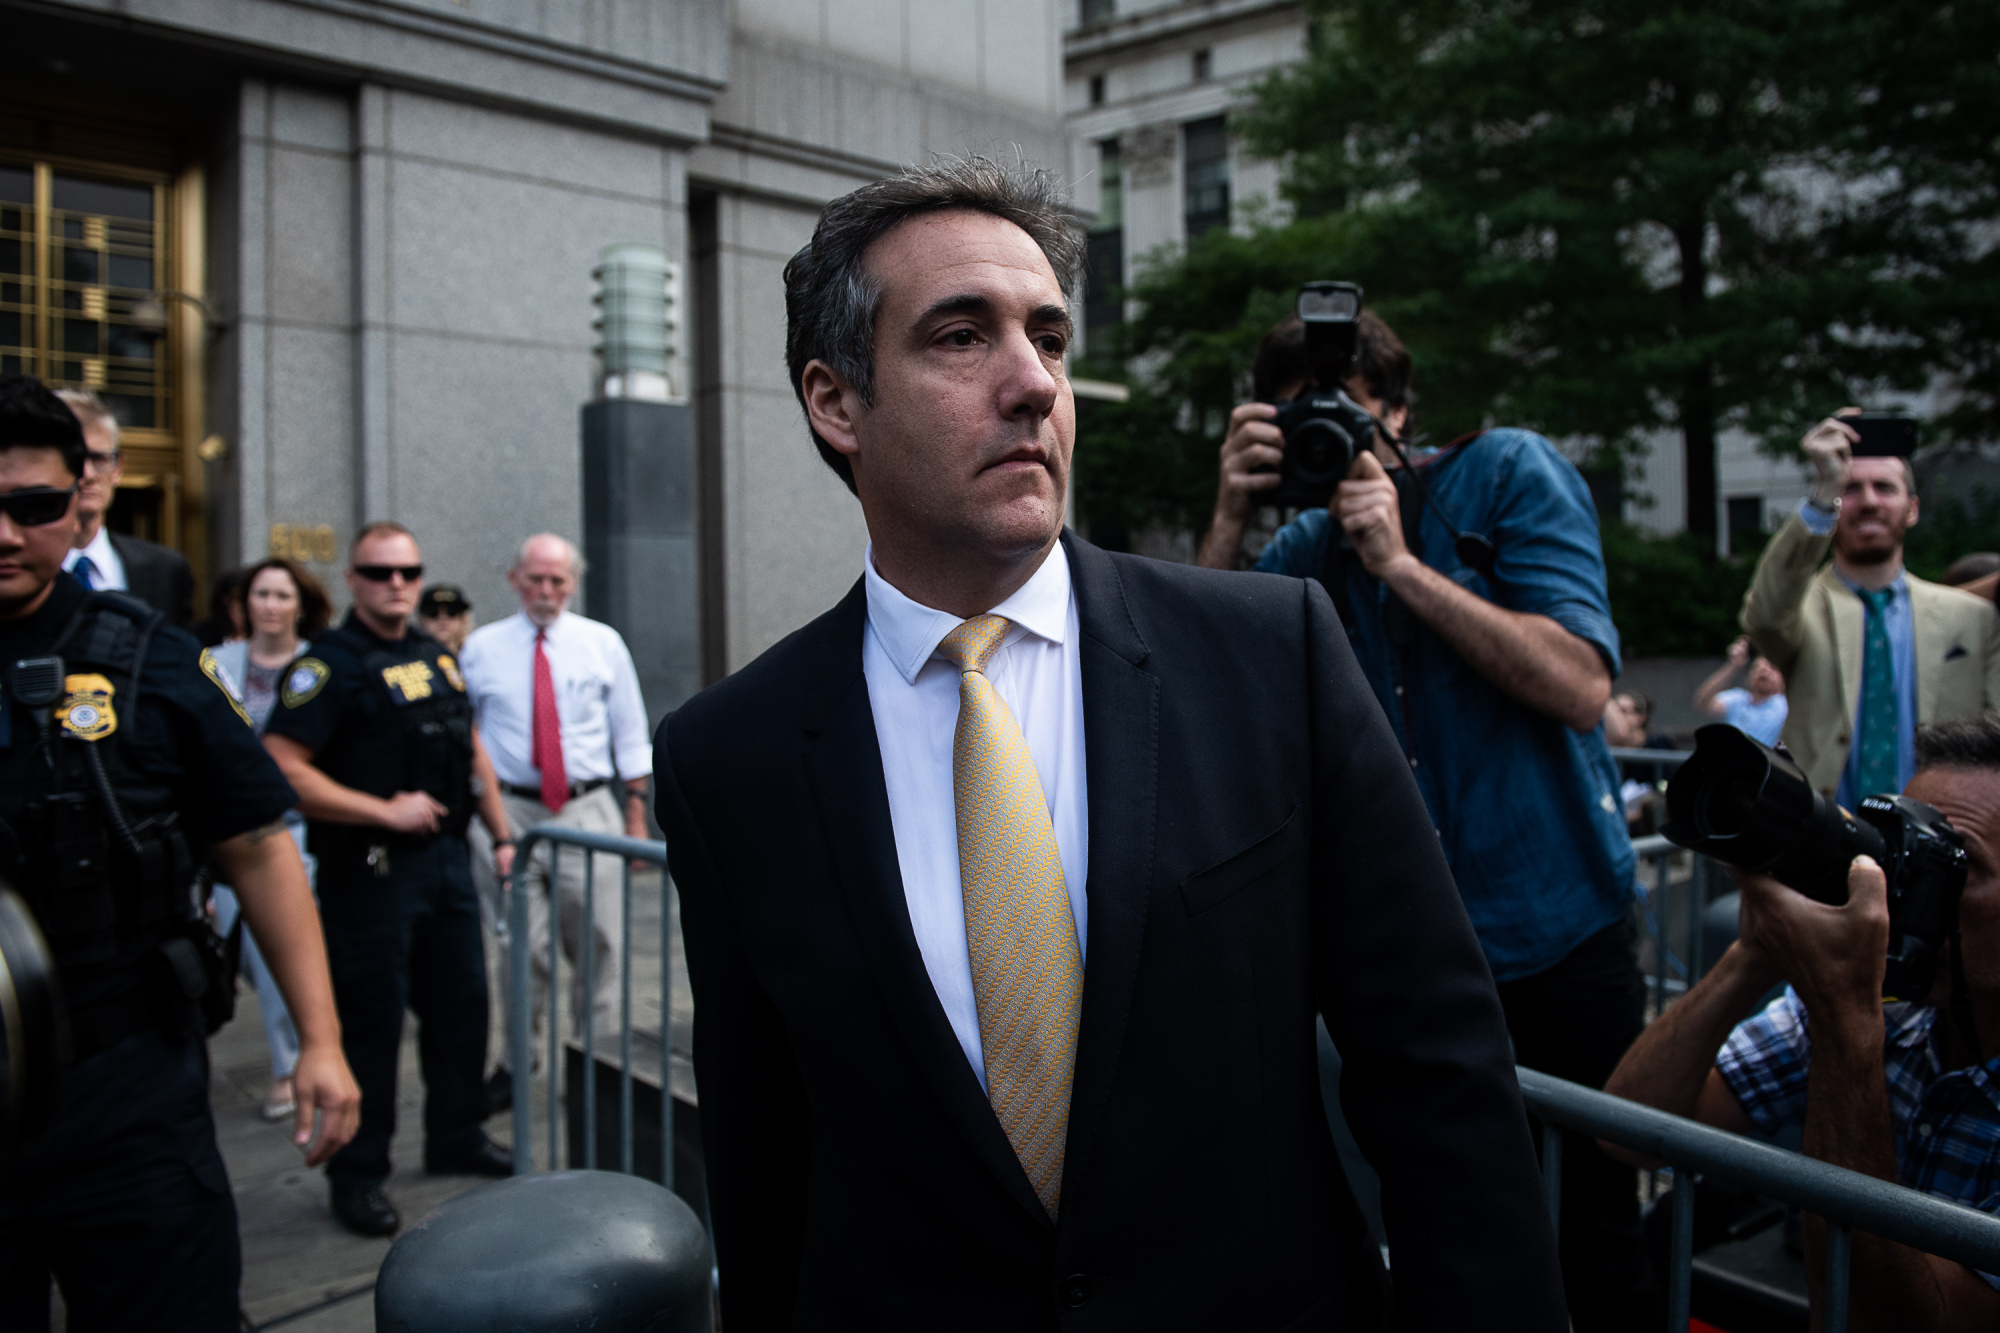 Michael Cohen exits from federal court in New York on Aug. 21, 2018.